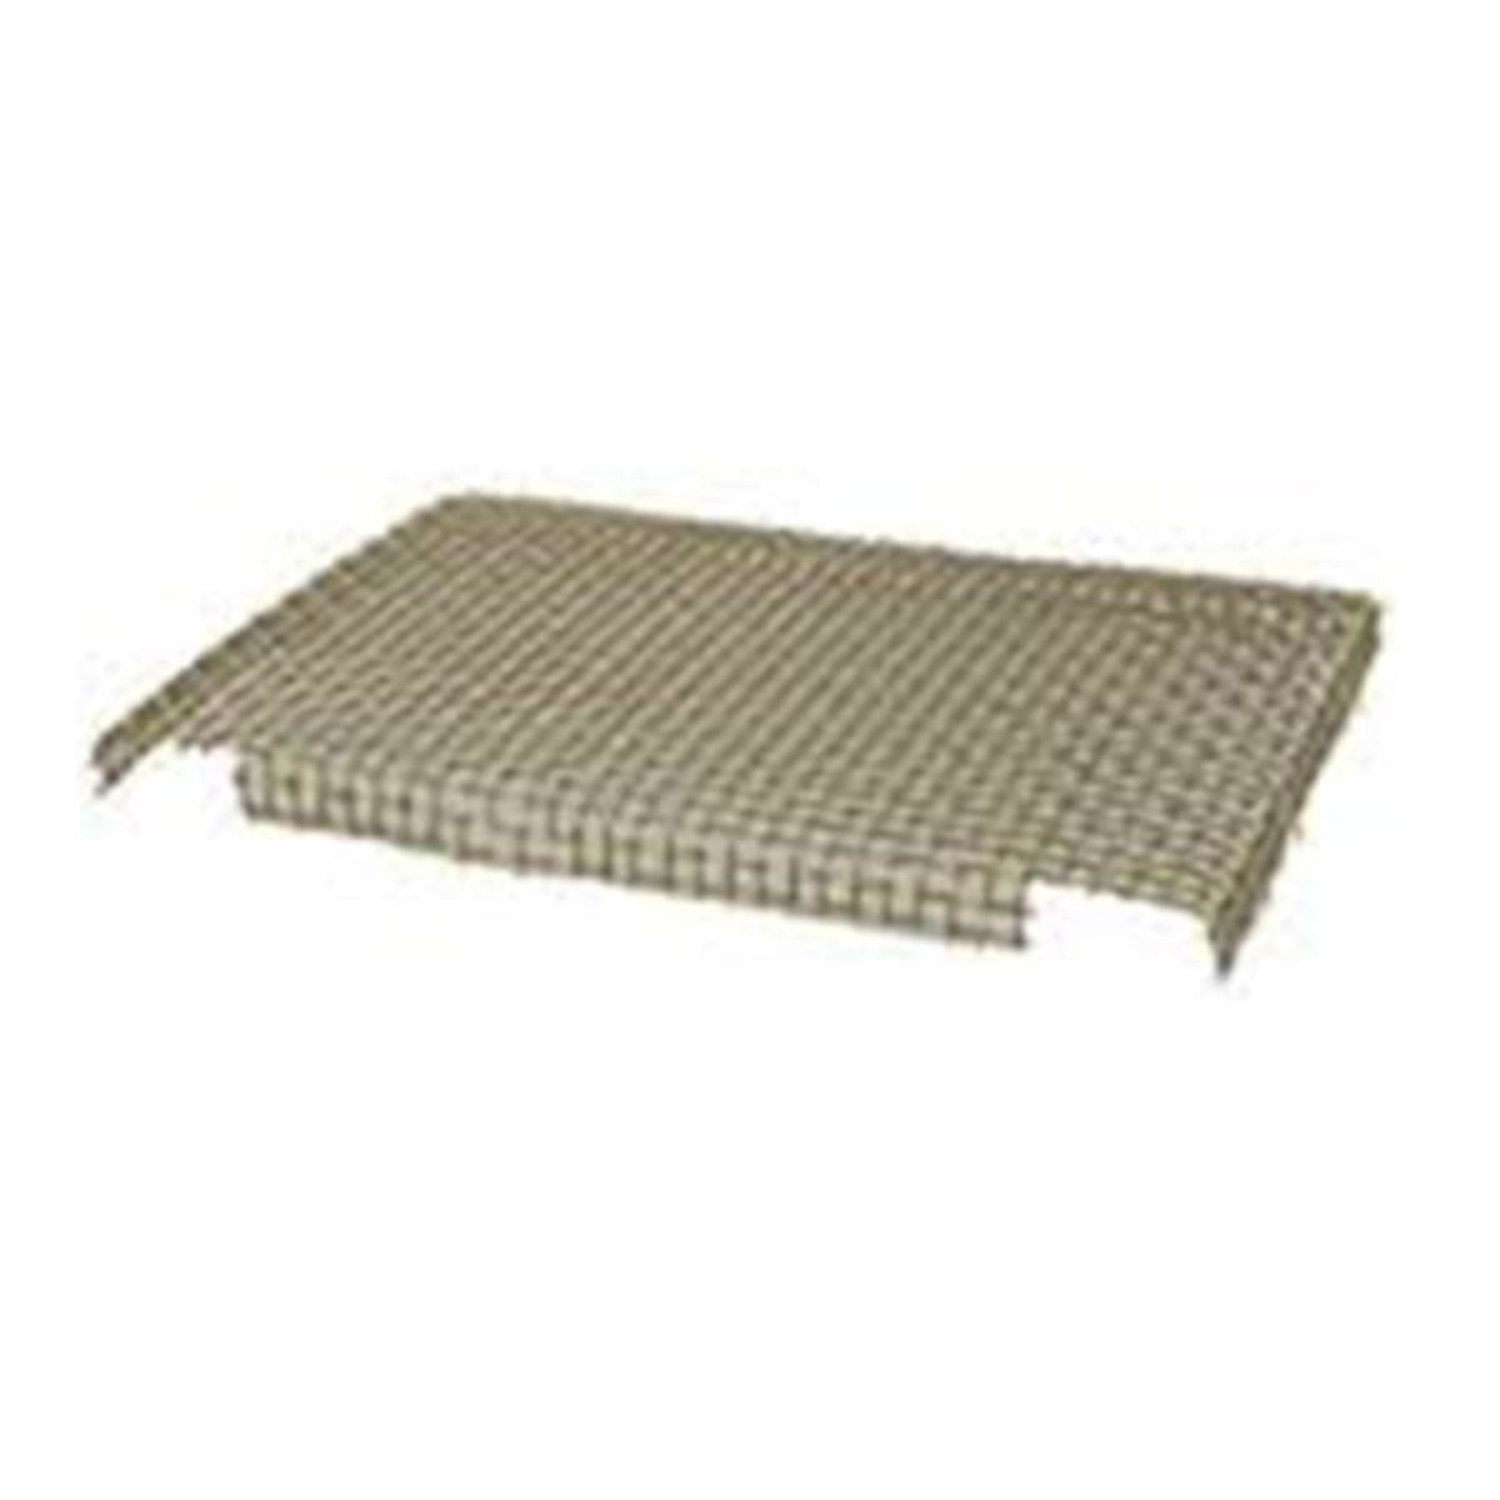 BBQ Grill TEC Grill 1 Piece Stainless Steel Mesh Screen STBS 7 3/4" x 11 3/8" OEM - Default - image 1 of 2